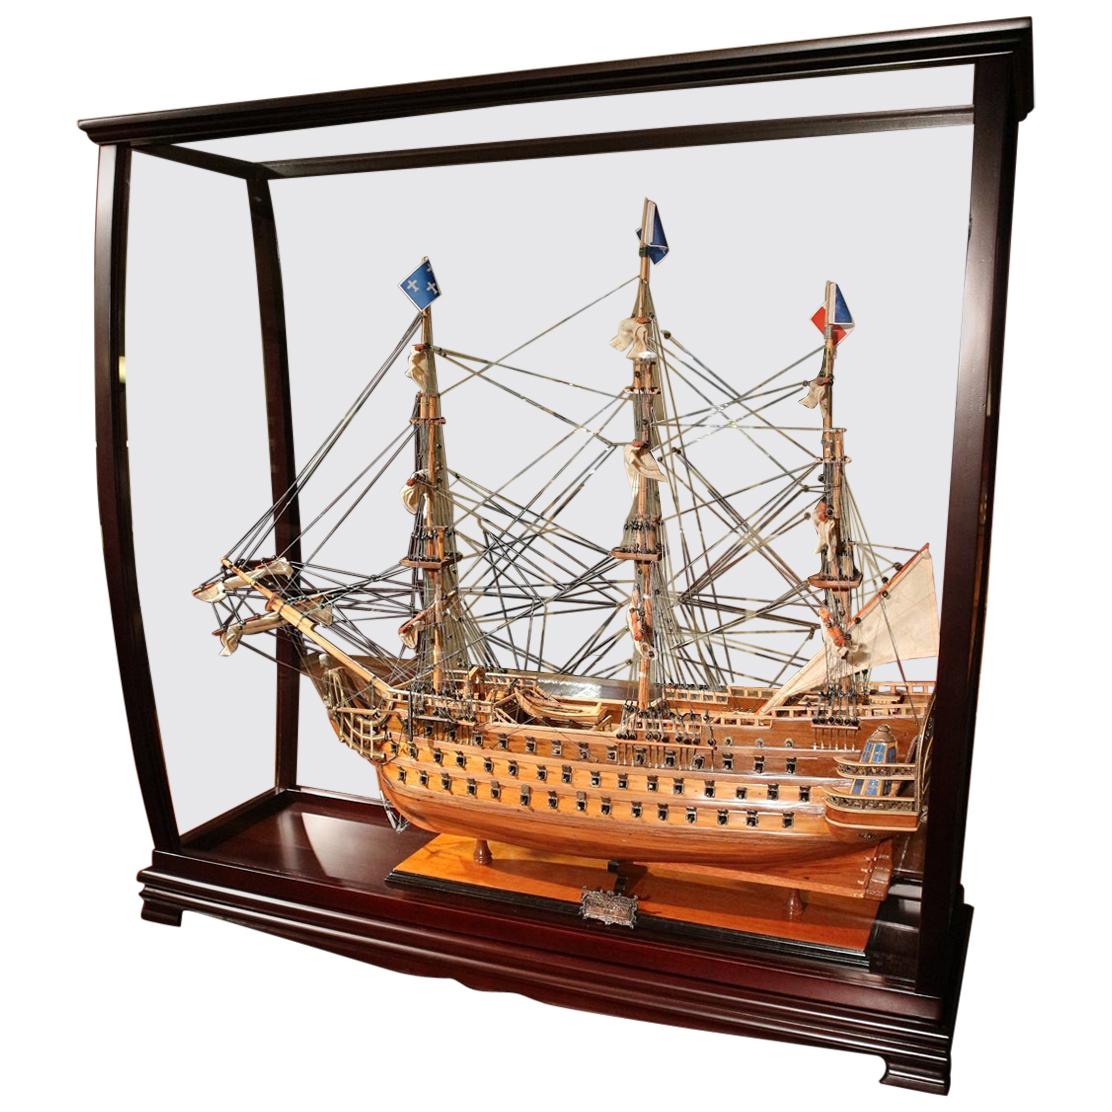 Museum-Quality, Fully Assembled Replica of Royal louis For Sale